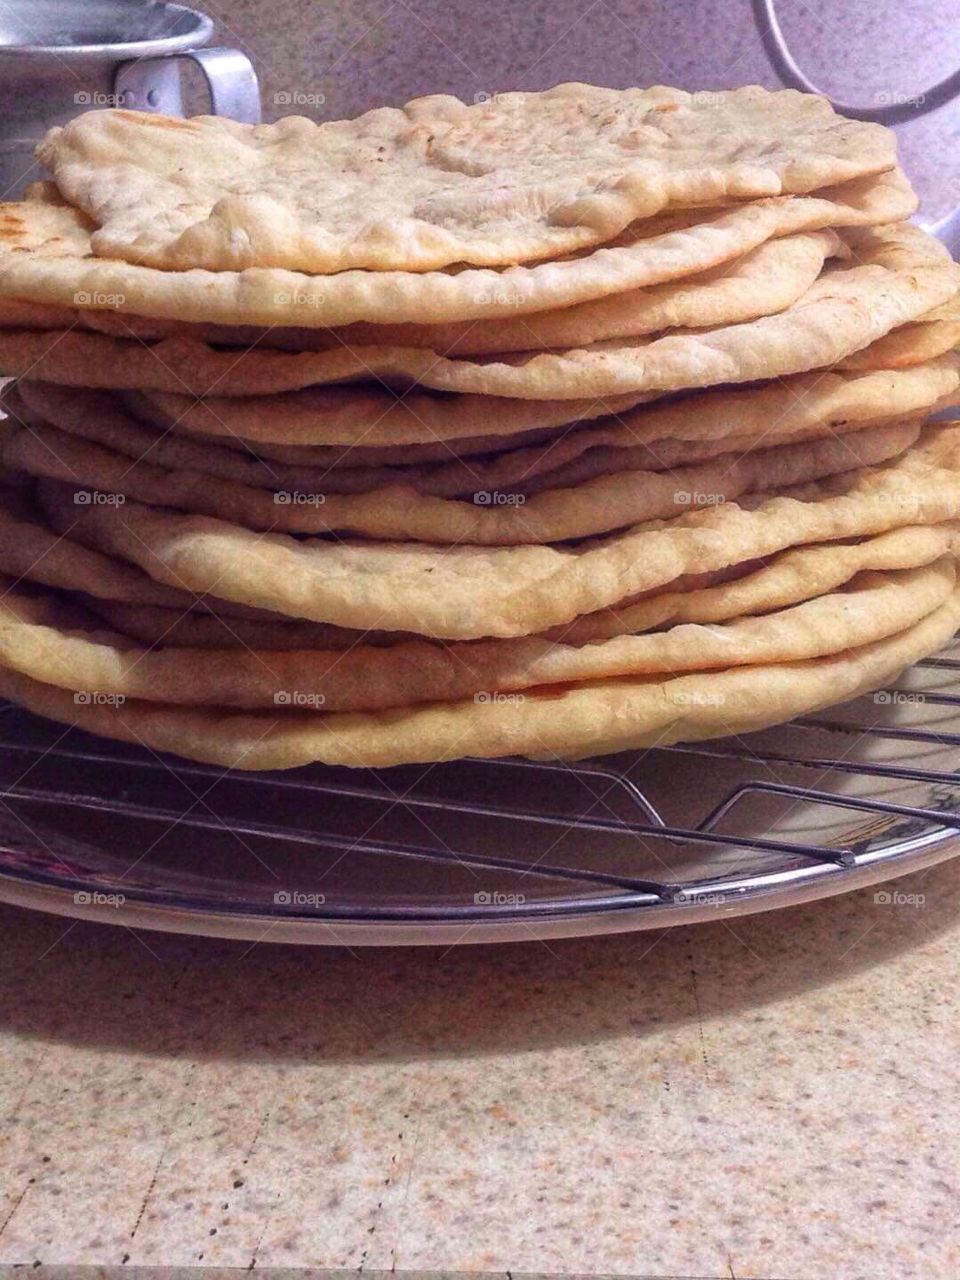 Homemade, hand rolled pita bread! Nothing better than homemade fresh. 